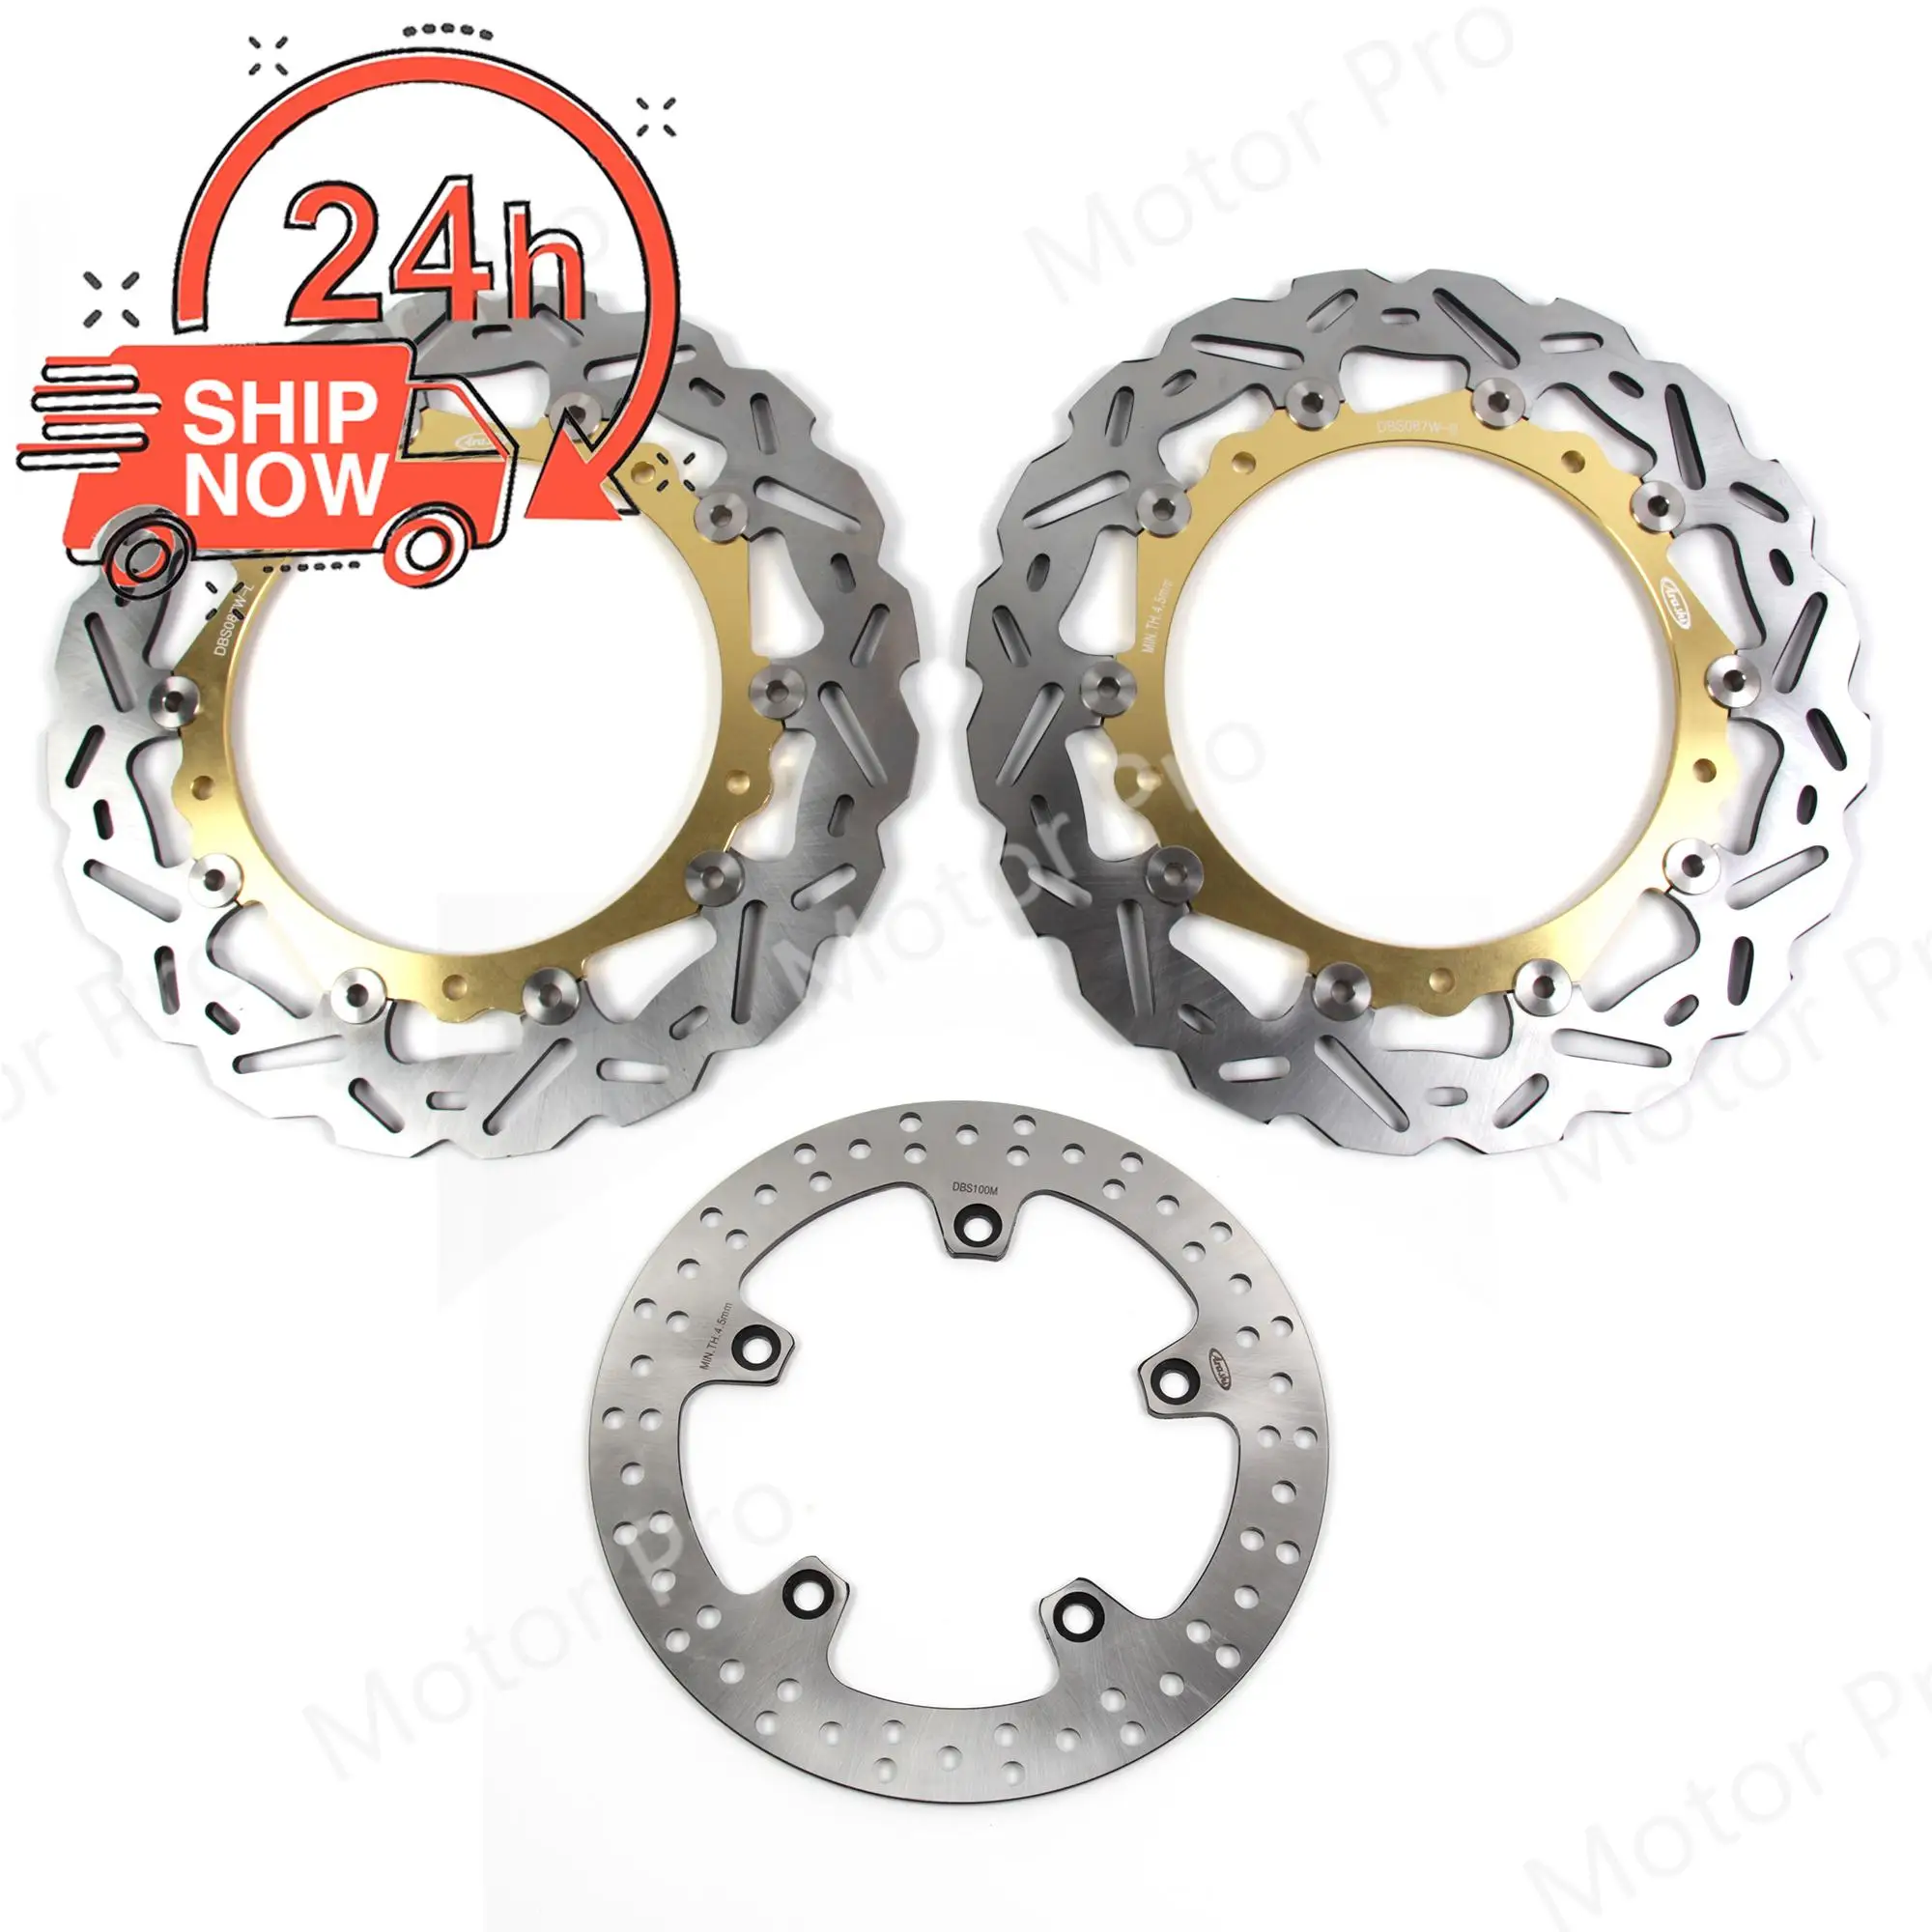 

For Bmw S1000XR 2015 2016 Front Rear Brake Disc Disk Rotor Kit Motorcycle Accessories S 1000 XR S1000 1000XR 15 16 BLACK GOLD